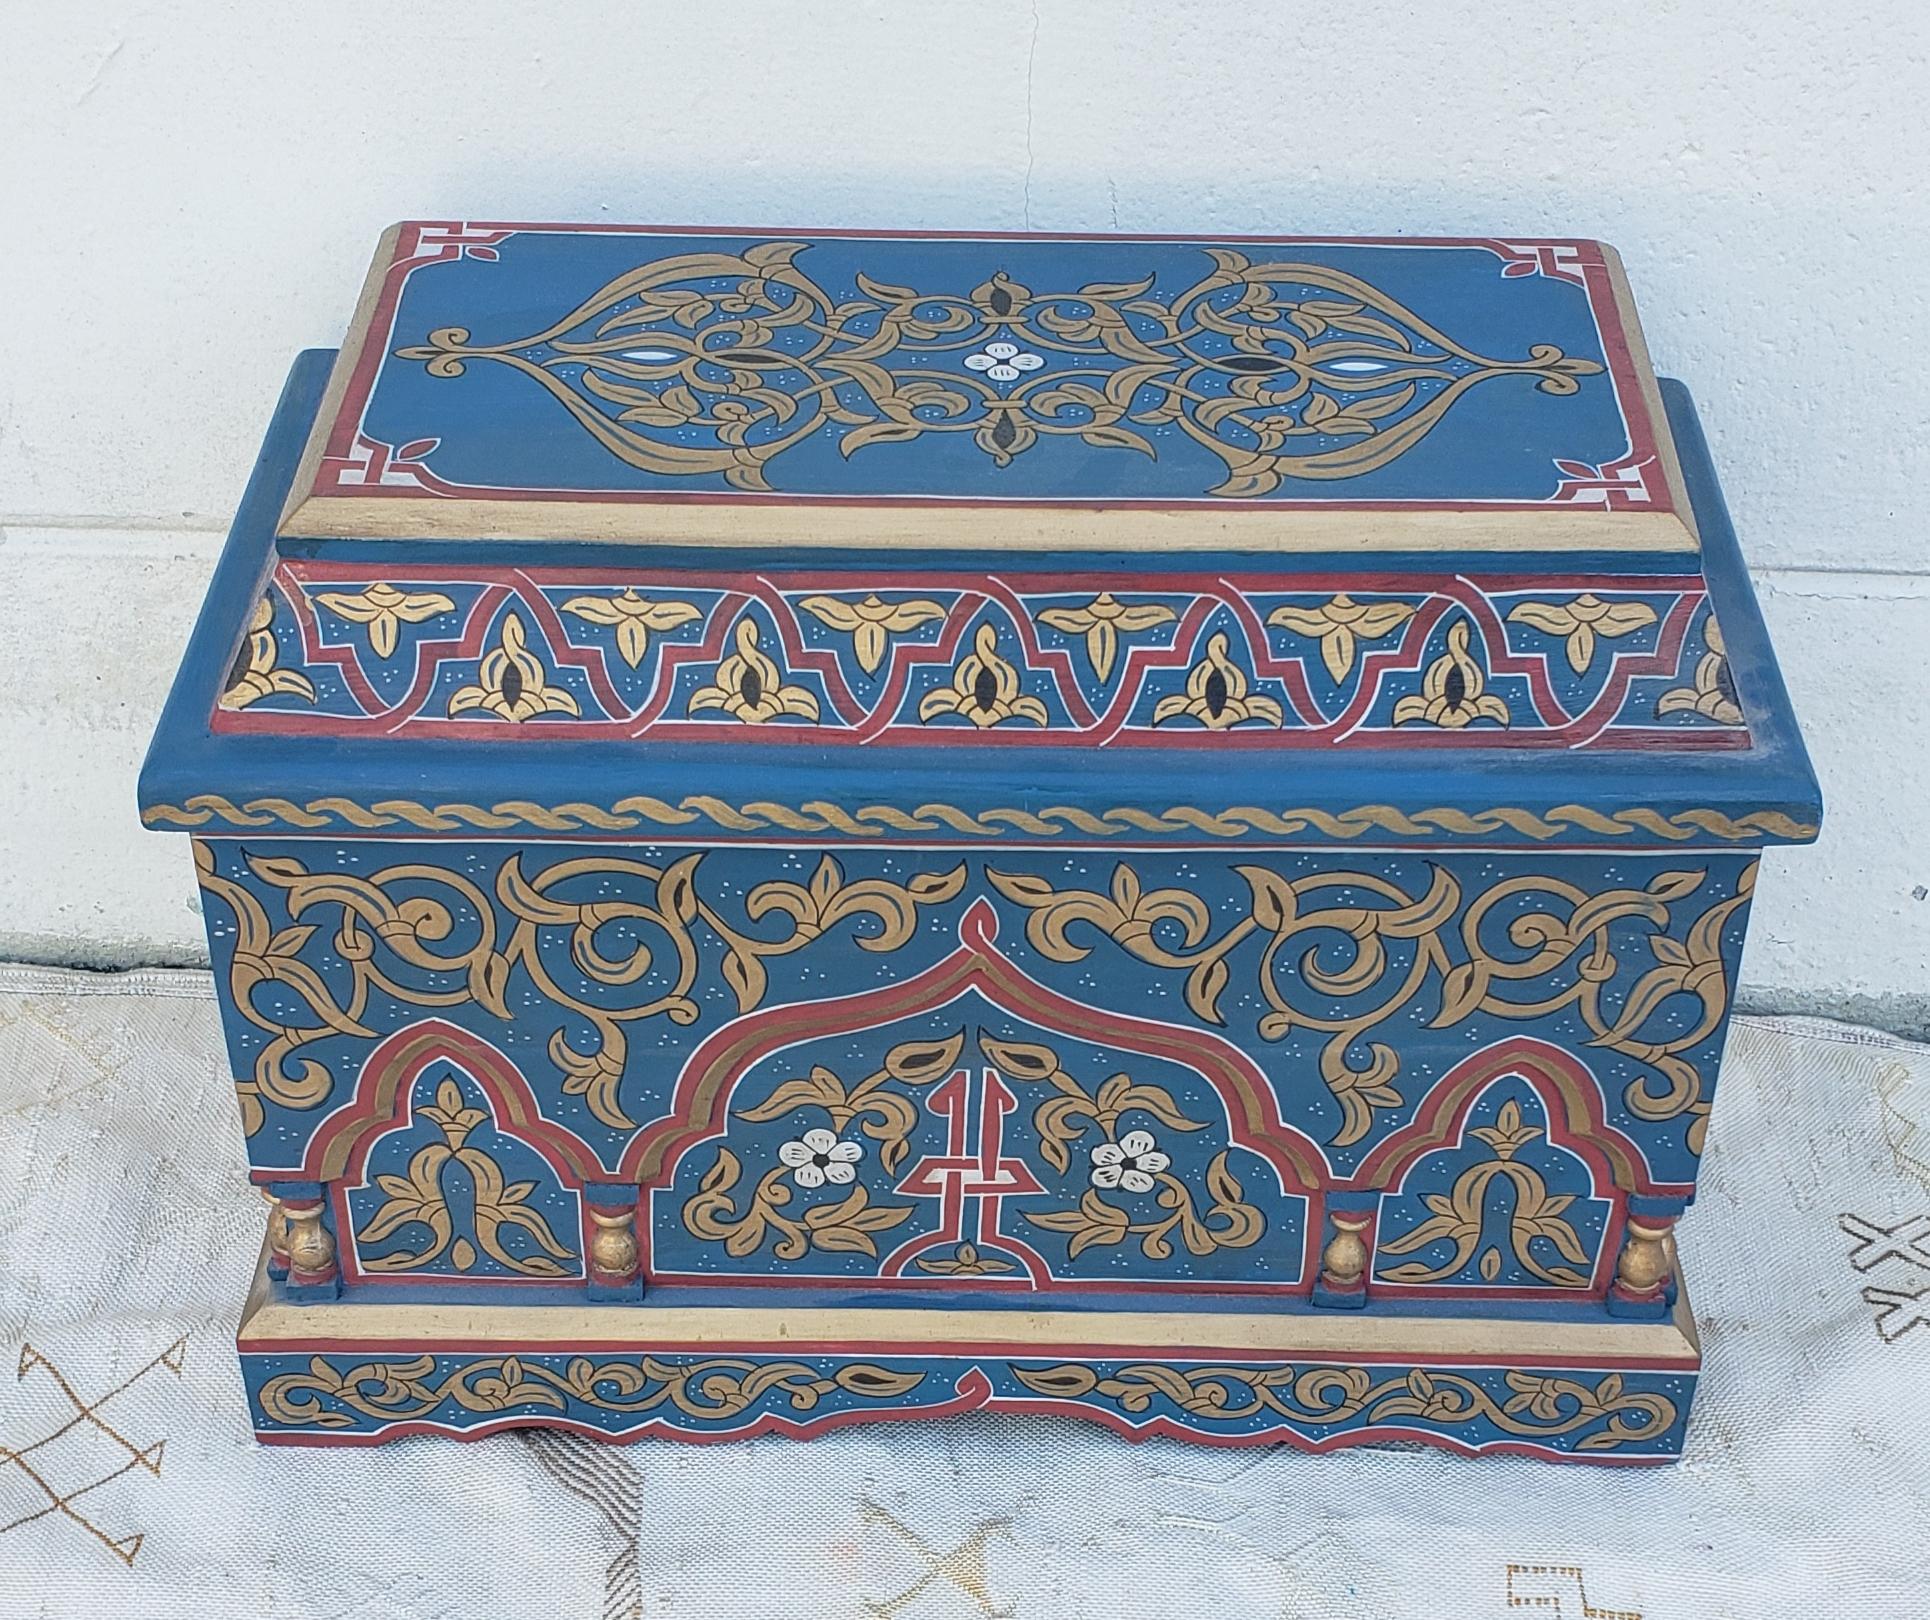 hand painted and hand carved throughout, this one of a kind trunk is the perfect accessory to use anywhere in your home or office. Meticulous work all around this beautiful piece of art. Measuring approximately 16.5? long and 11.5